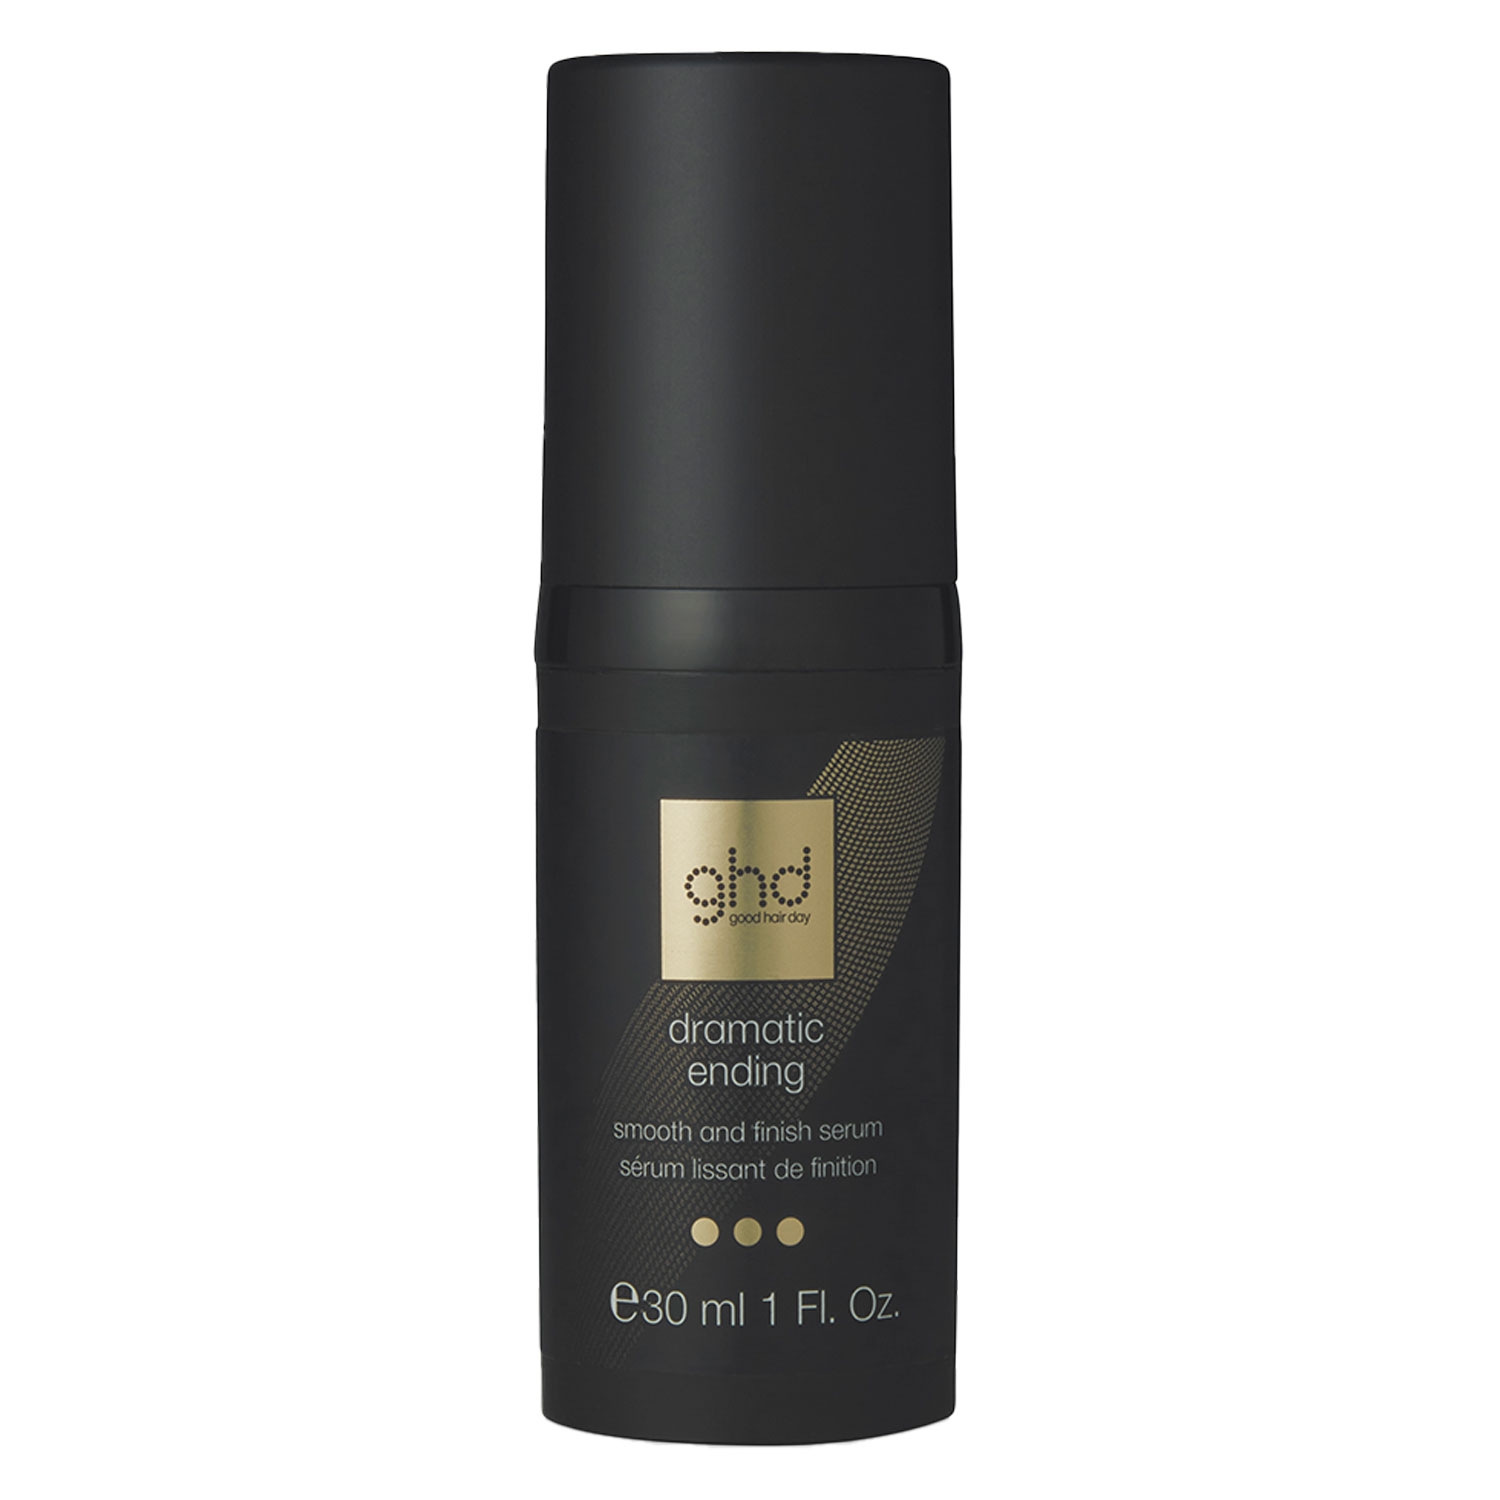 Product image from ghd Heat Protection Styling System - Dramatic Ending Smooth & Finish Serum